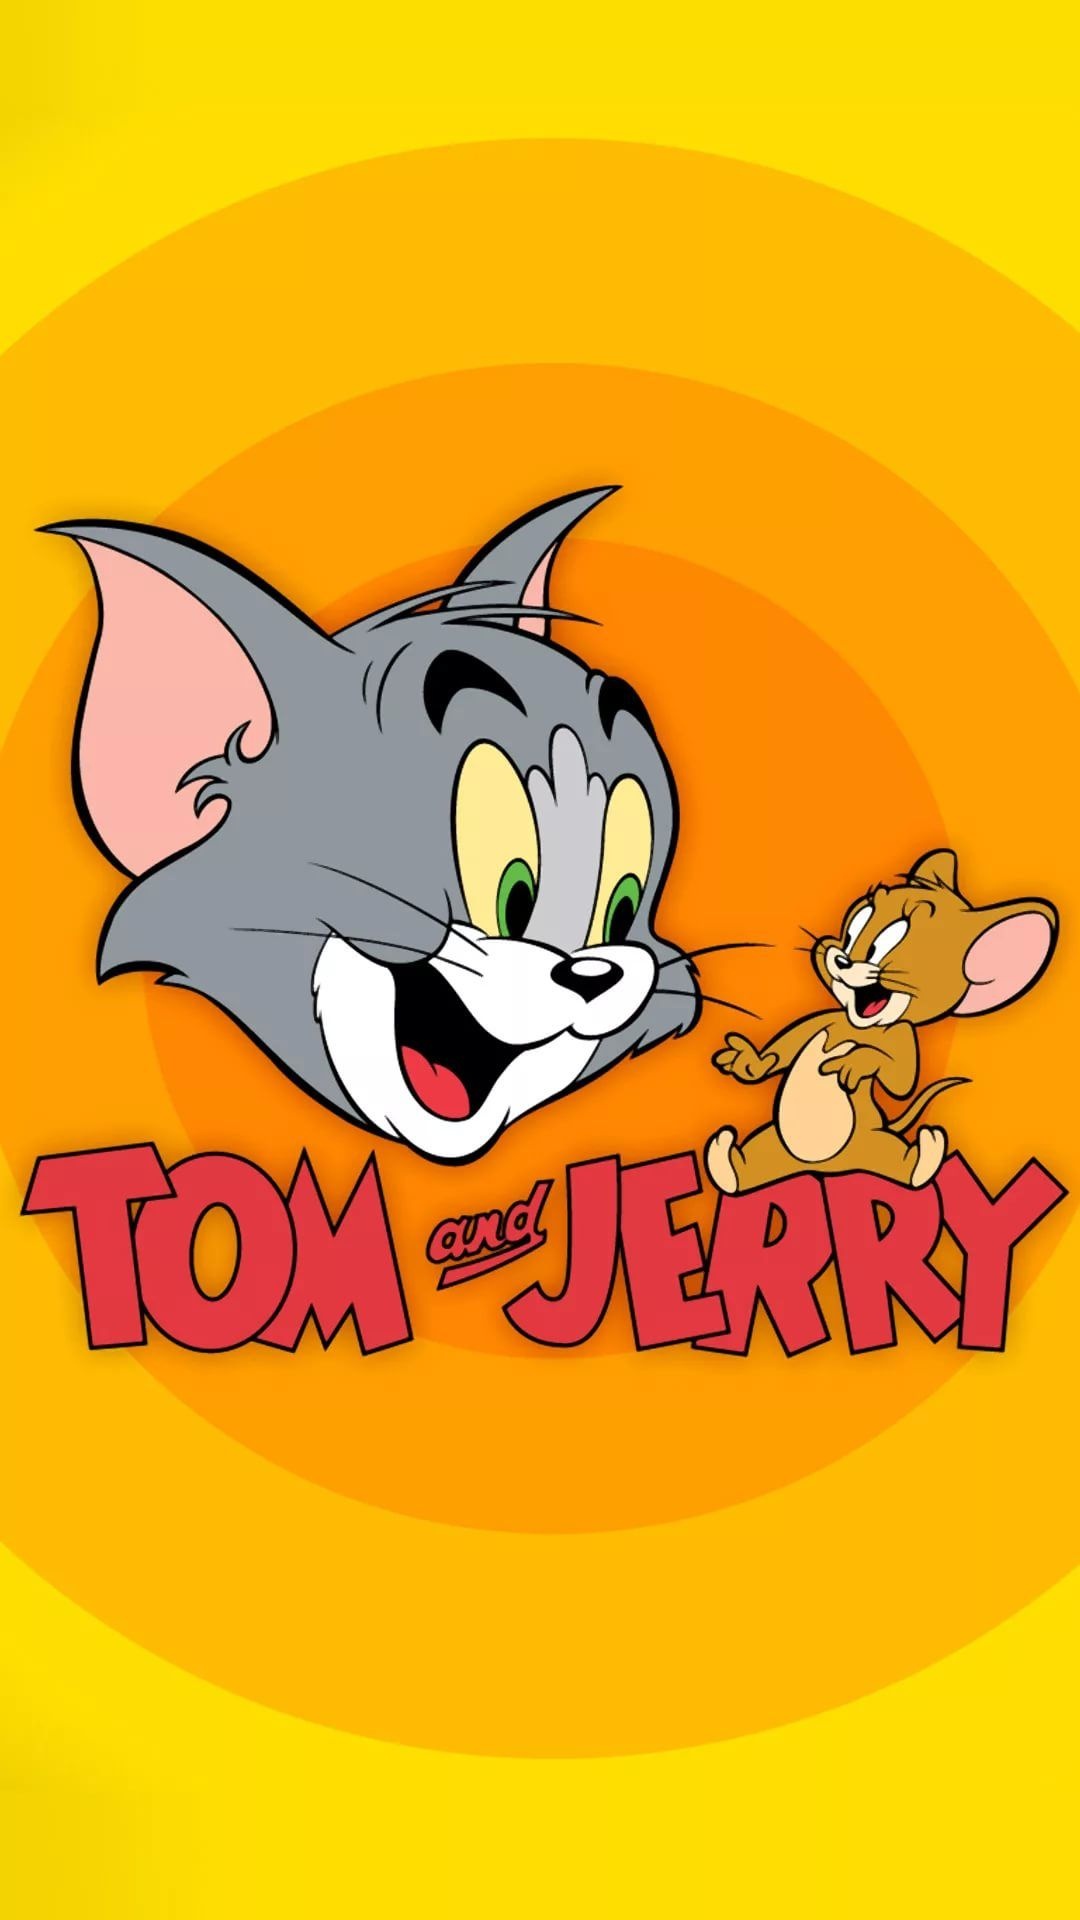 Tom and Jerry iPhone wallpapers, Beautiful illustrations, Personalize your device, Cartoon nostalgia, 1080x1920 Full HD Handy